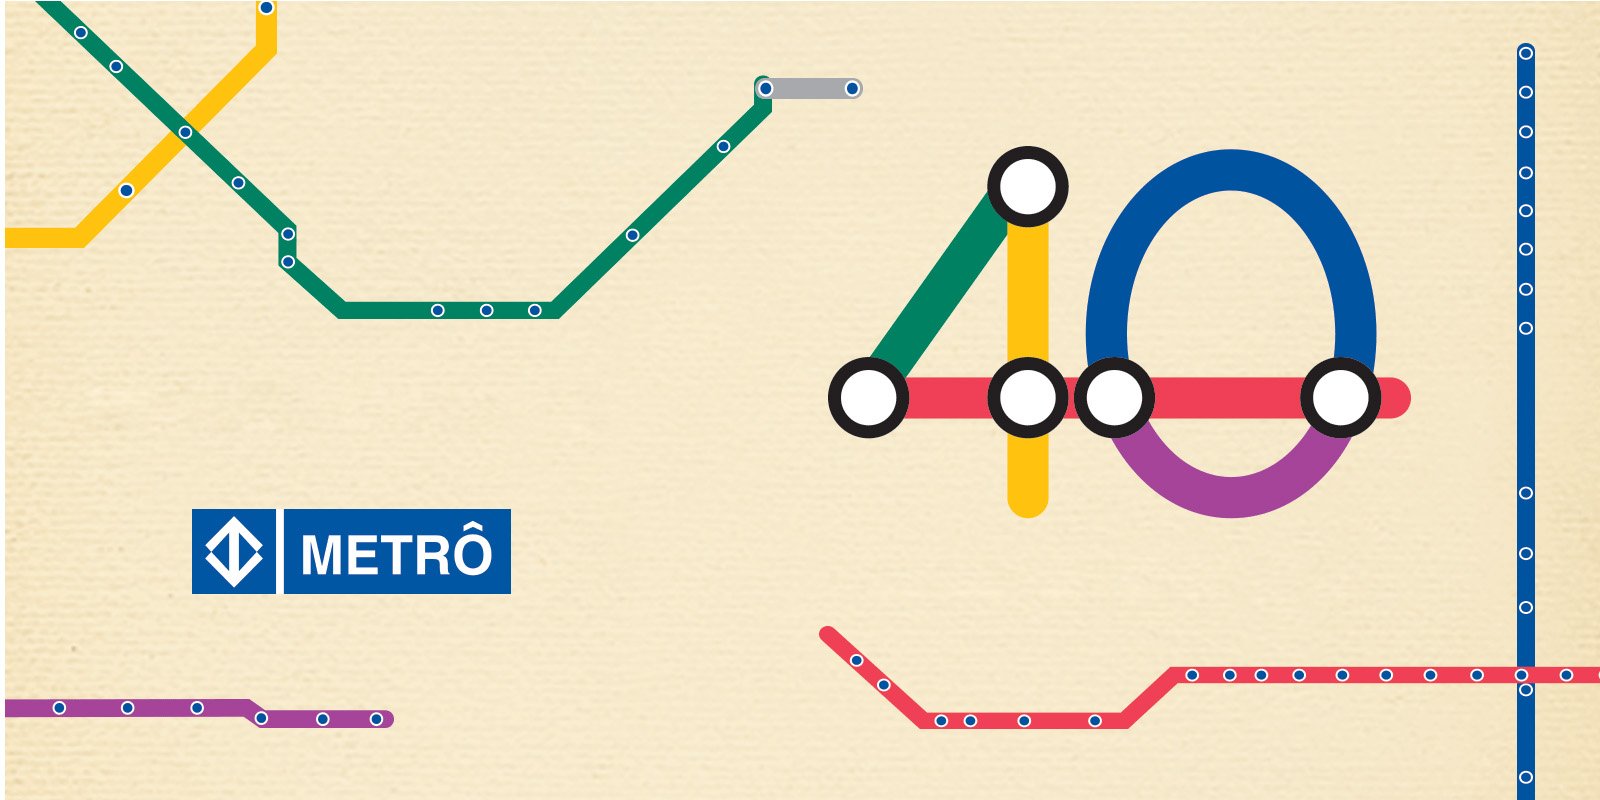 Featured image for “Metrô 40 anos”